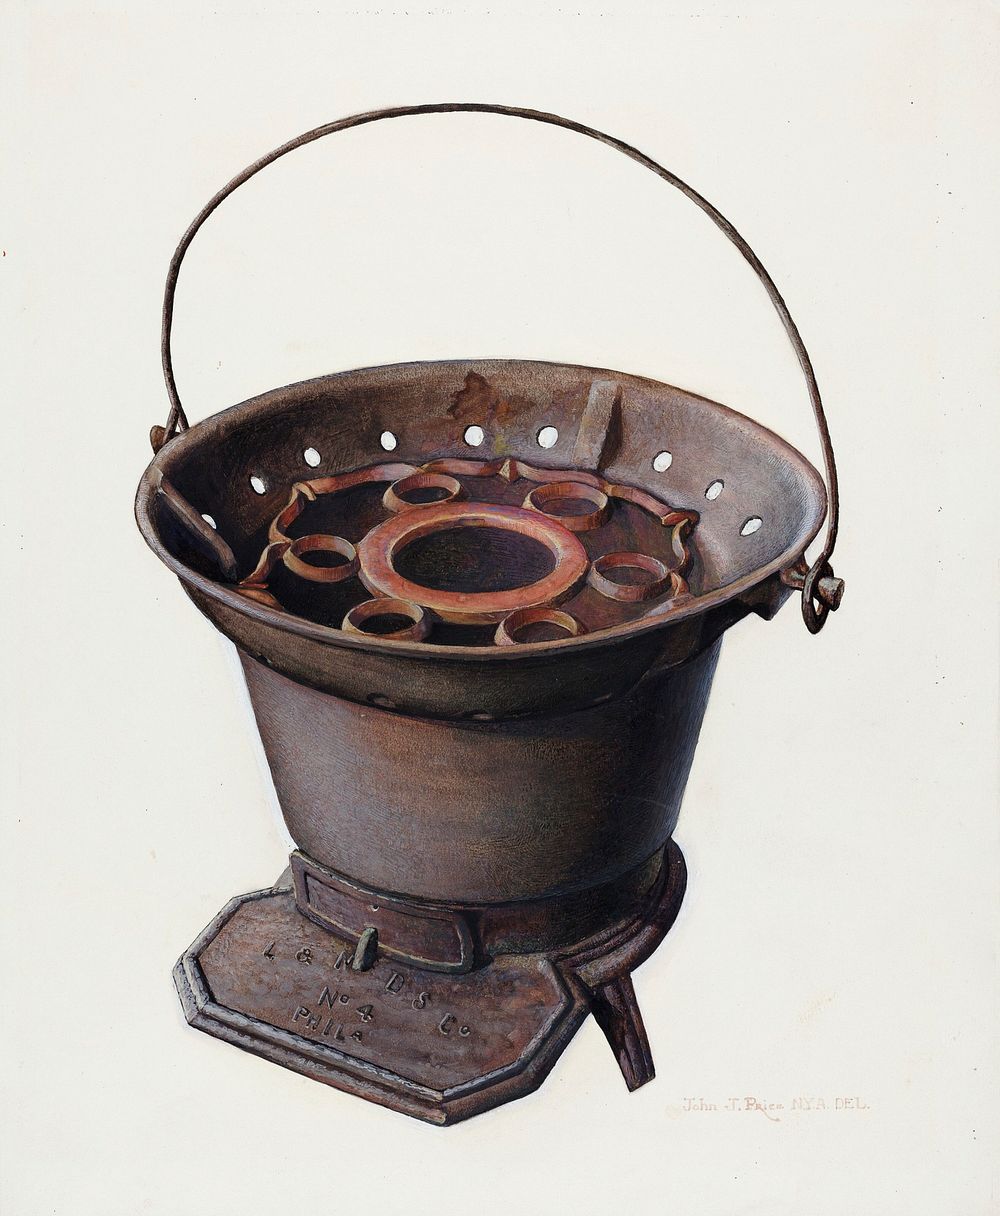 Charcoal Stove (ca. 1939) by John Price. Original from The National Gallery of Art. Digitally enhanced by rawpixel.